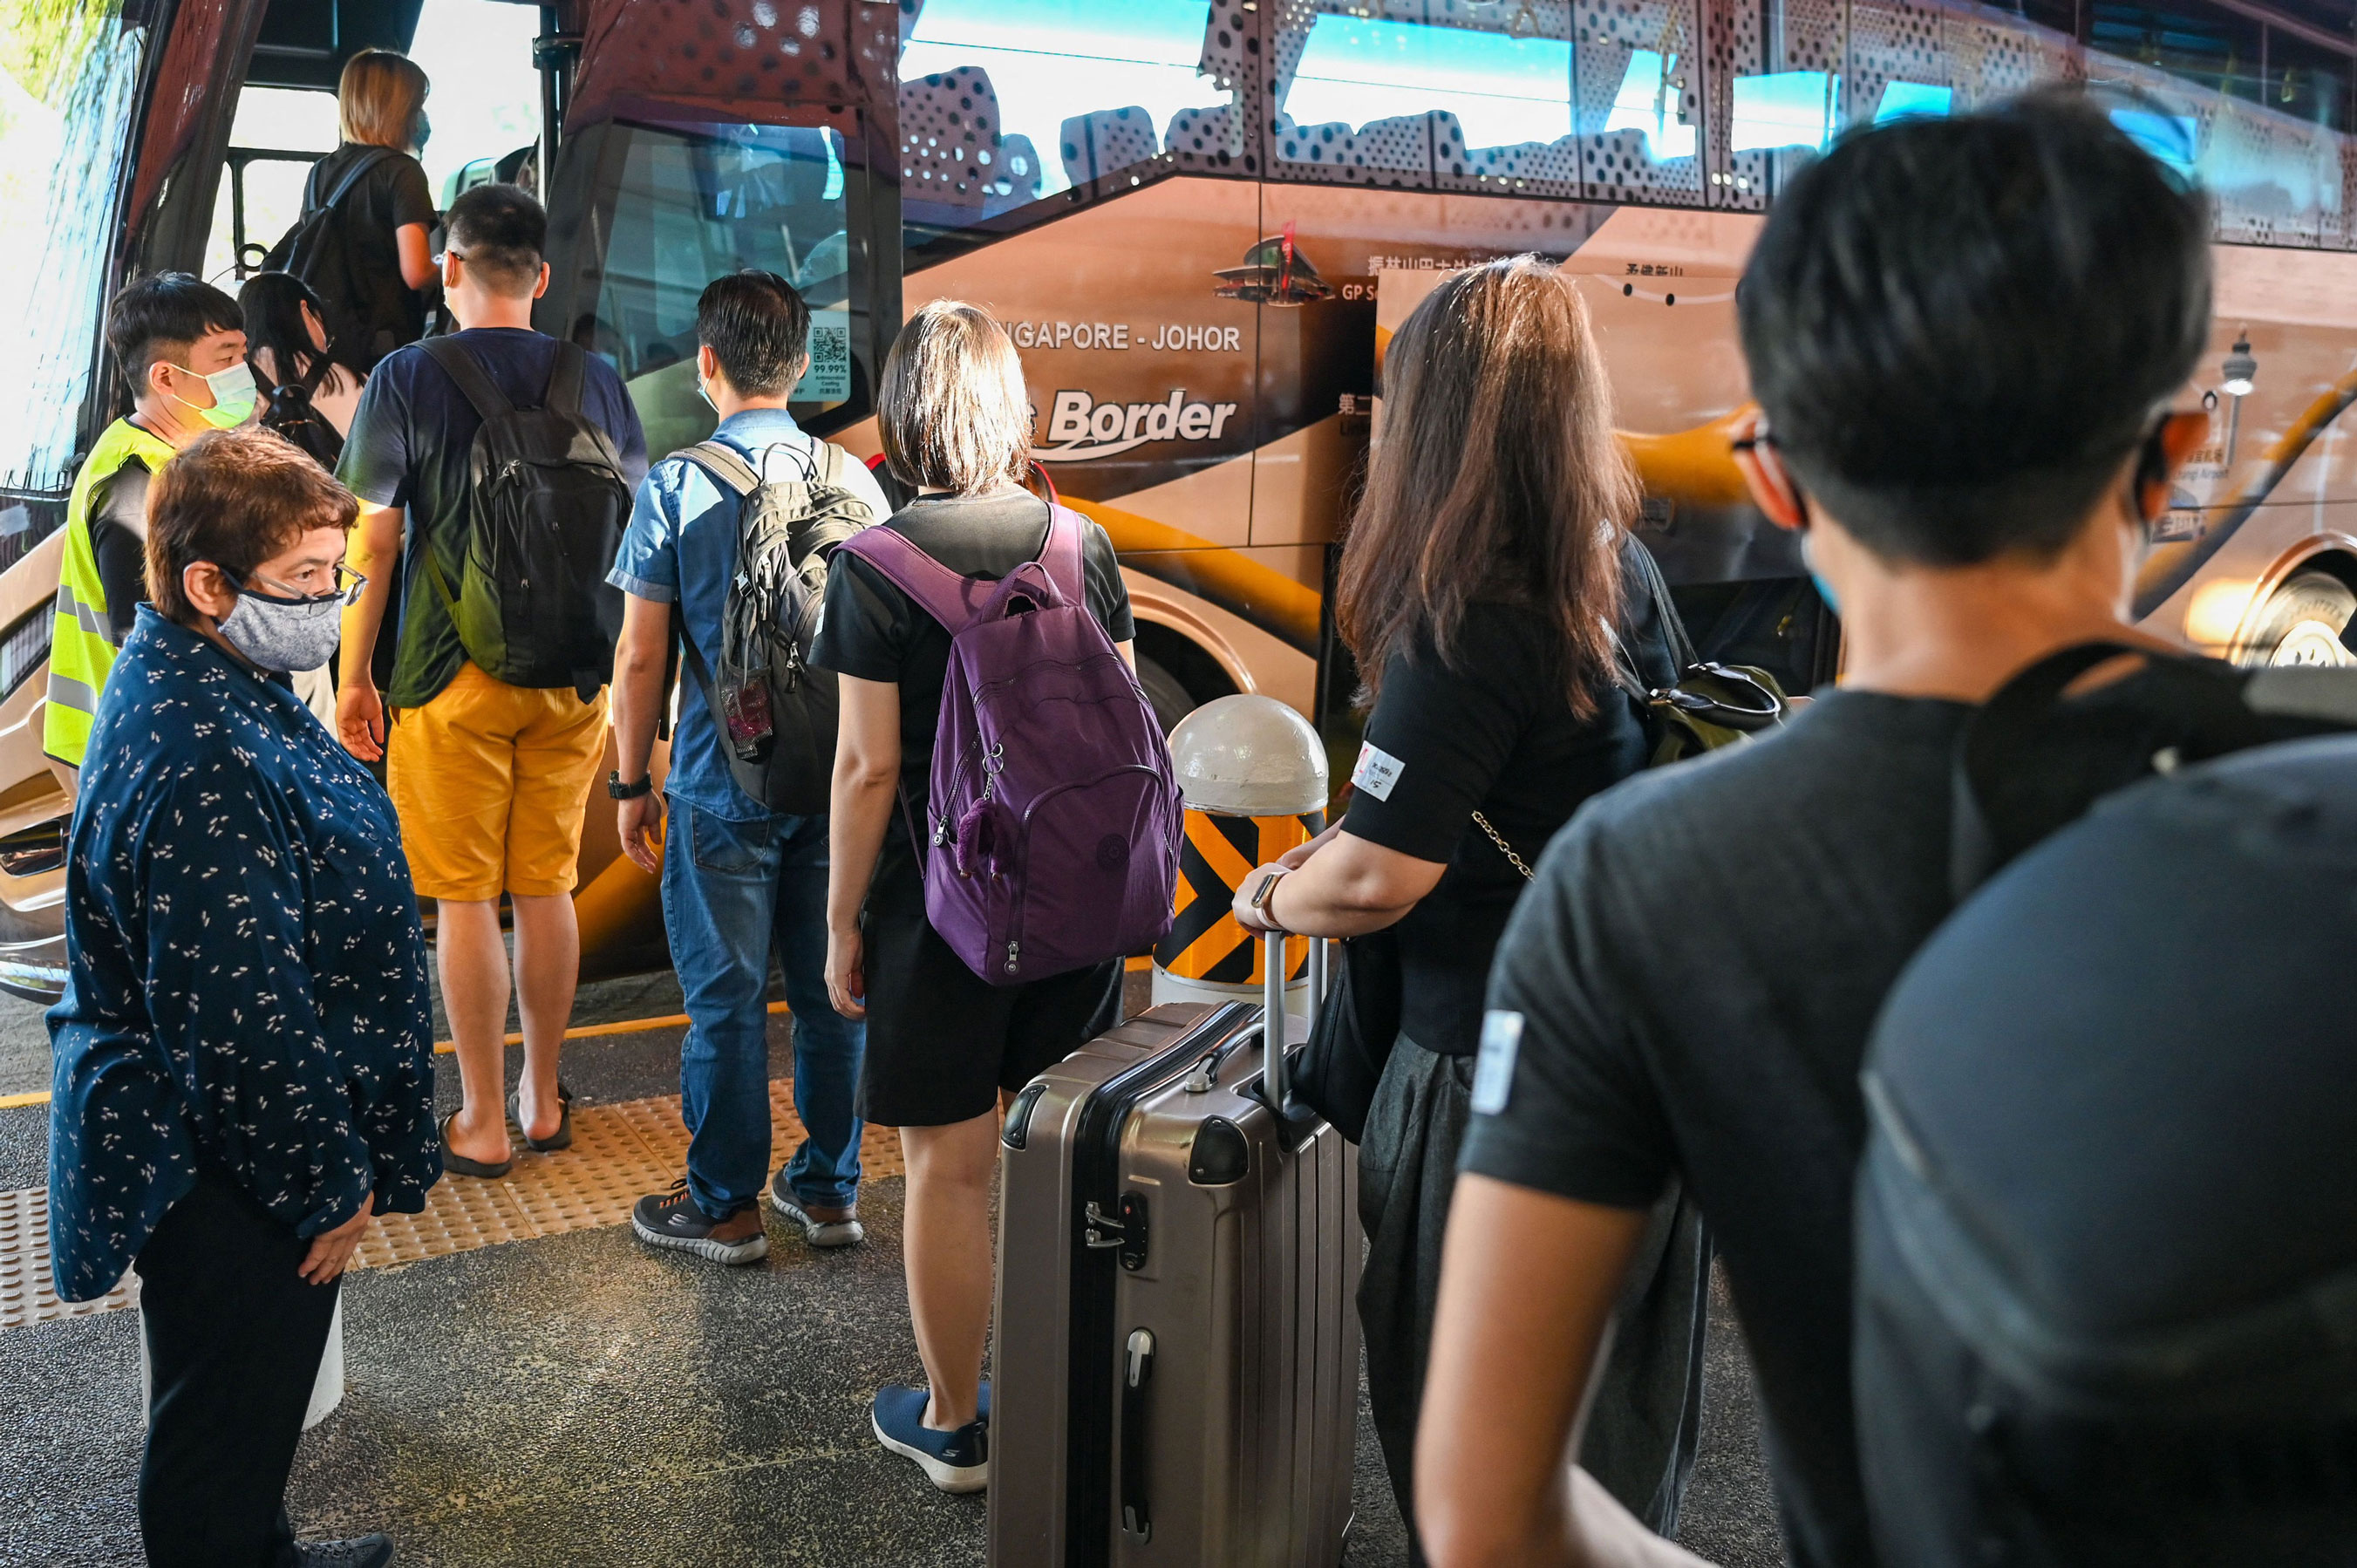 People board a bus in Singapore on November 29, under the vaccinated travel lane (VTL) for border-crossing passengers to Malaysia's southern state of Johor.